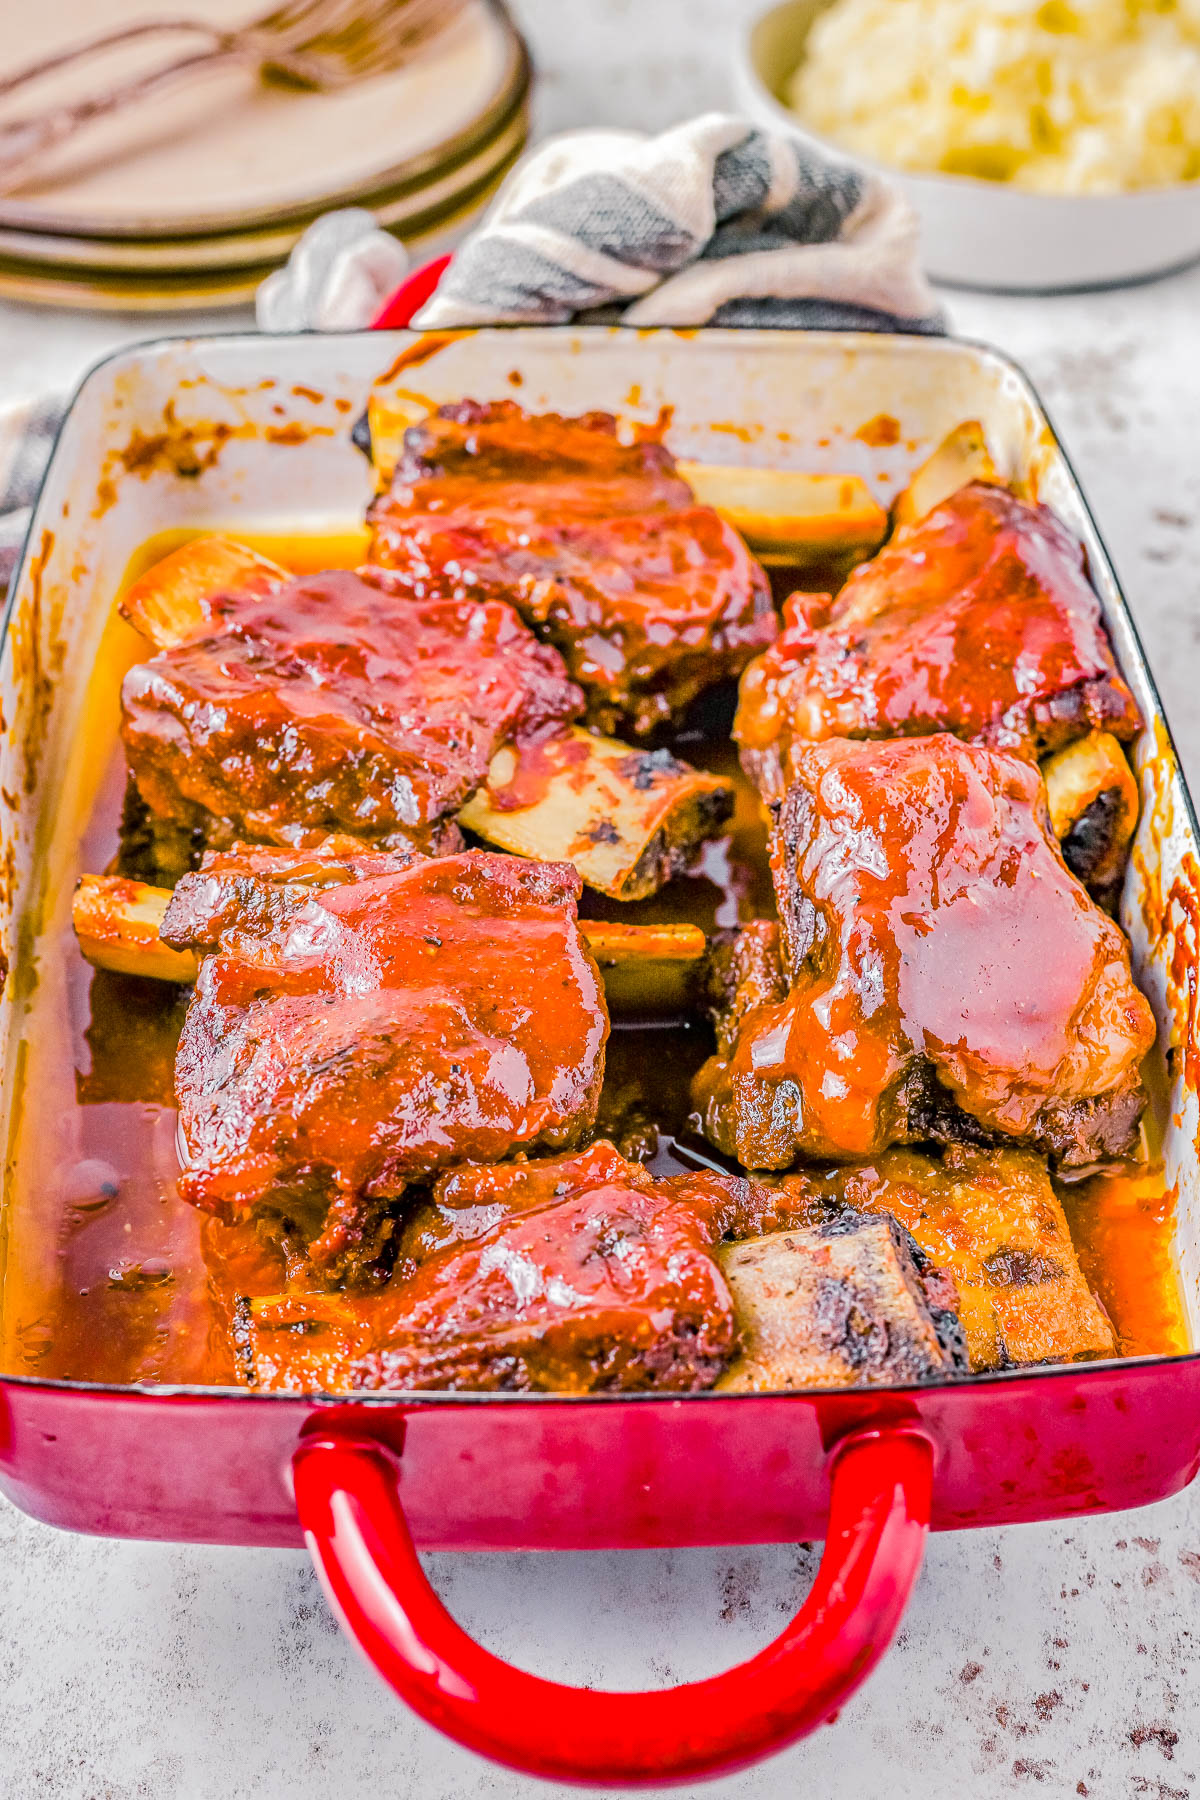 Baked Barbecue Beef Short Ribs - Tender, fall-off-the-bone meat smothered in a homemade BBQ-based sauce that's bursting with sweet, tangy, and smoky flavors! Impress your family and friends with this EASY comfort food recipe that’s perfect for meat lovers and barbecue enthusiasts alike!